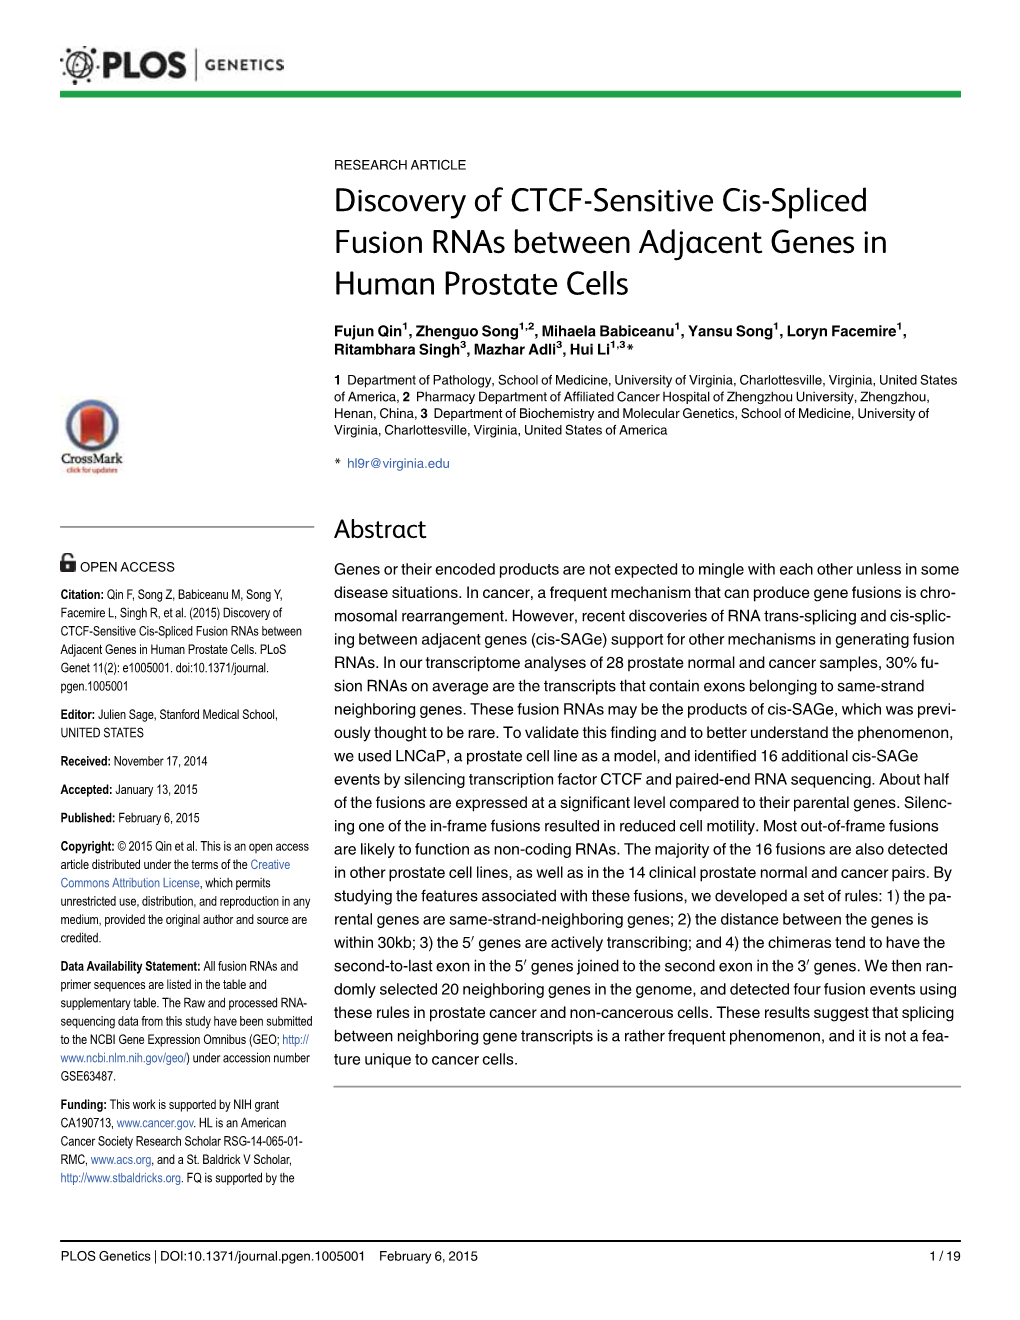 Discovery of CTCF-Sensitive Cis-Spliced Fusion Rnas Between Adjacent Genes in Human Prostate Cells